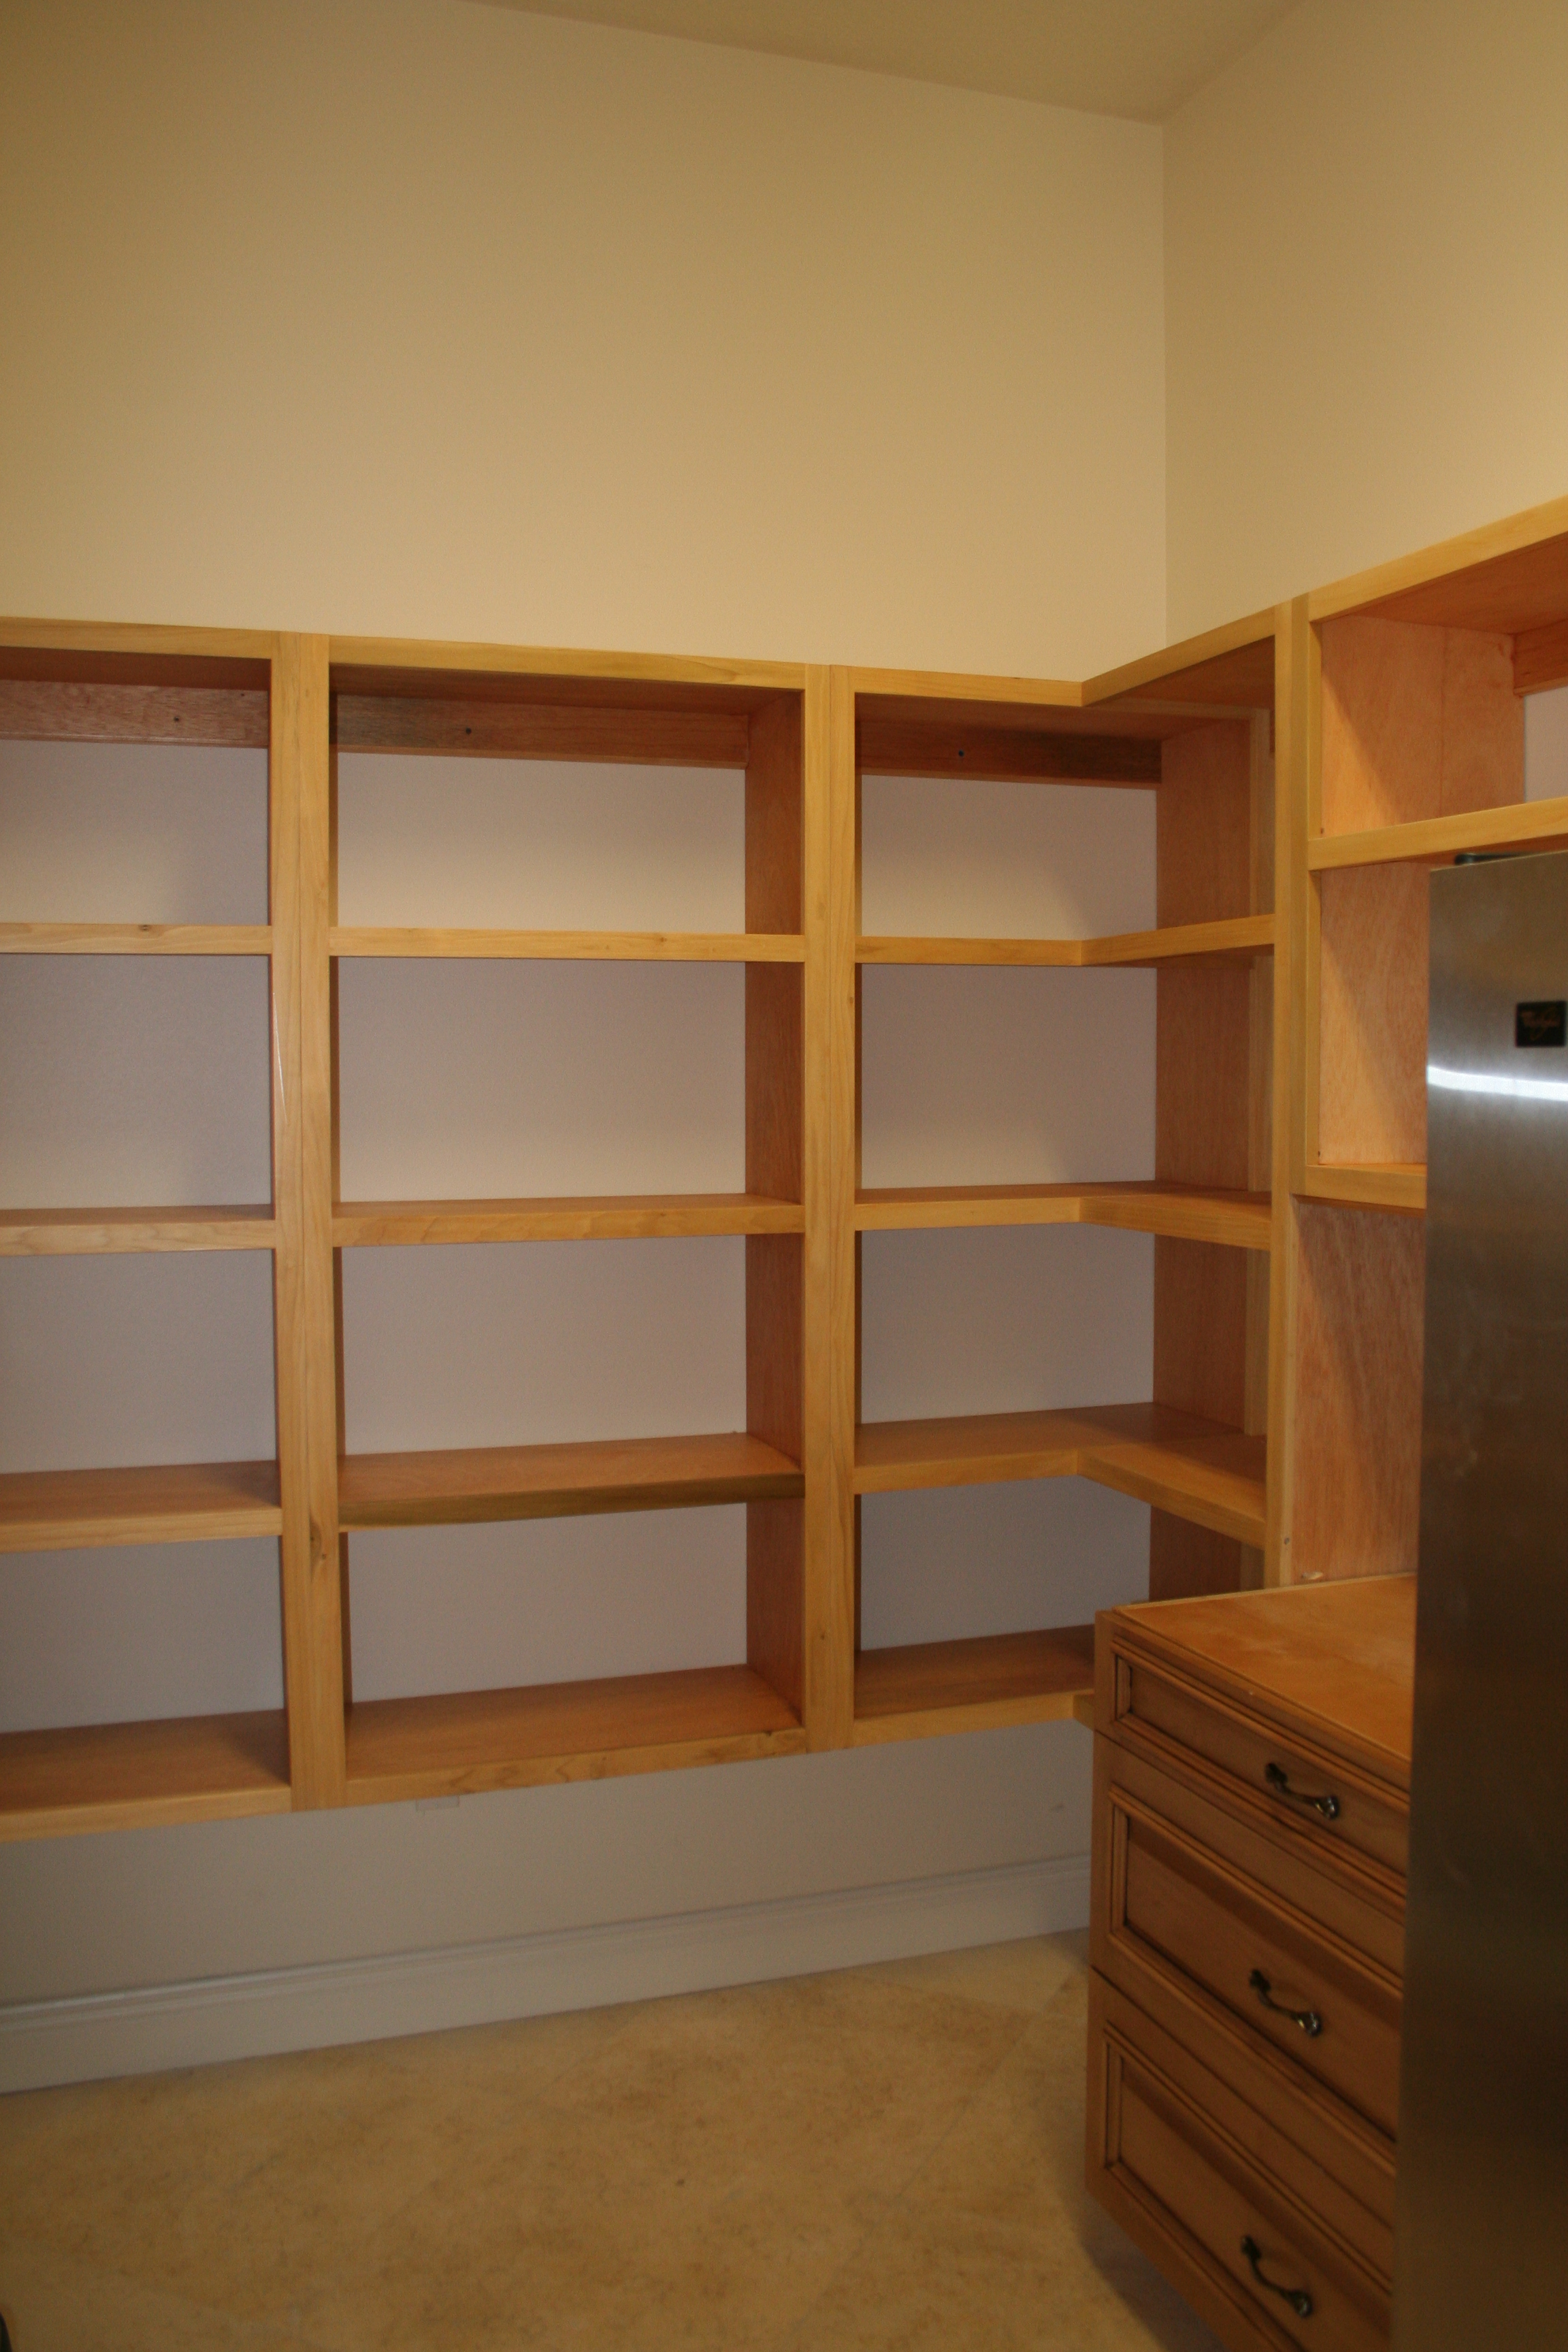 pantry shelving systems design photo - 5